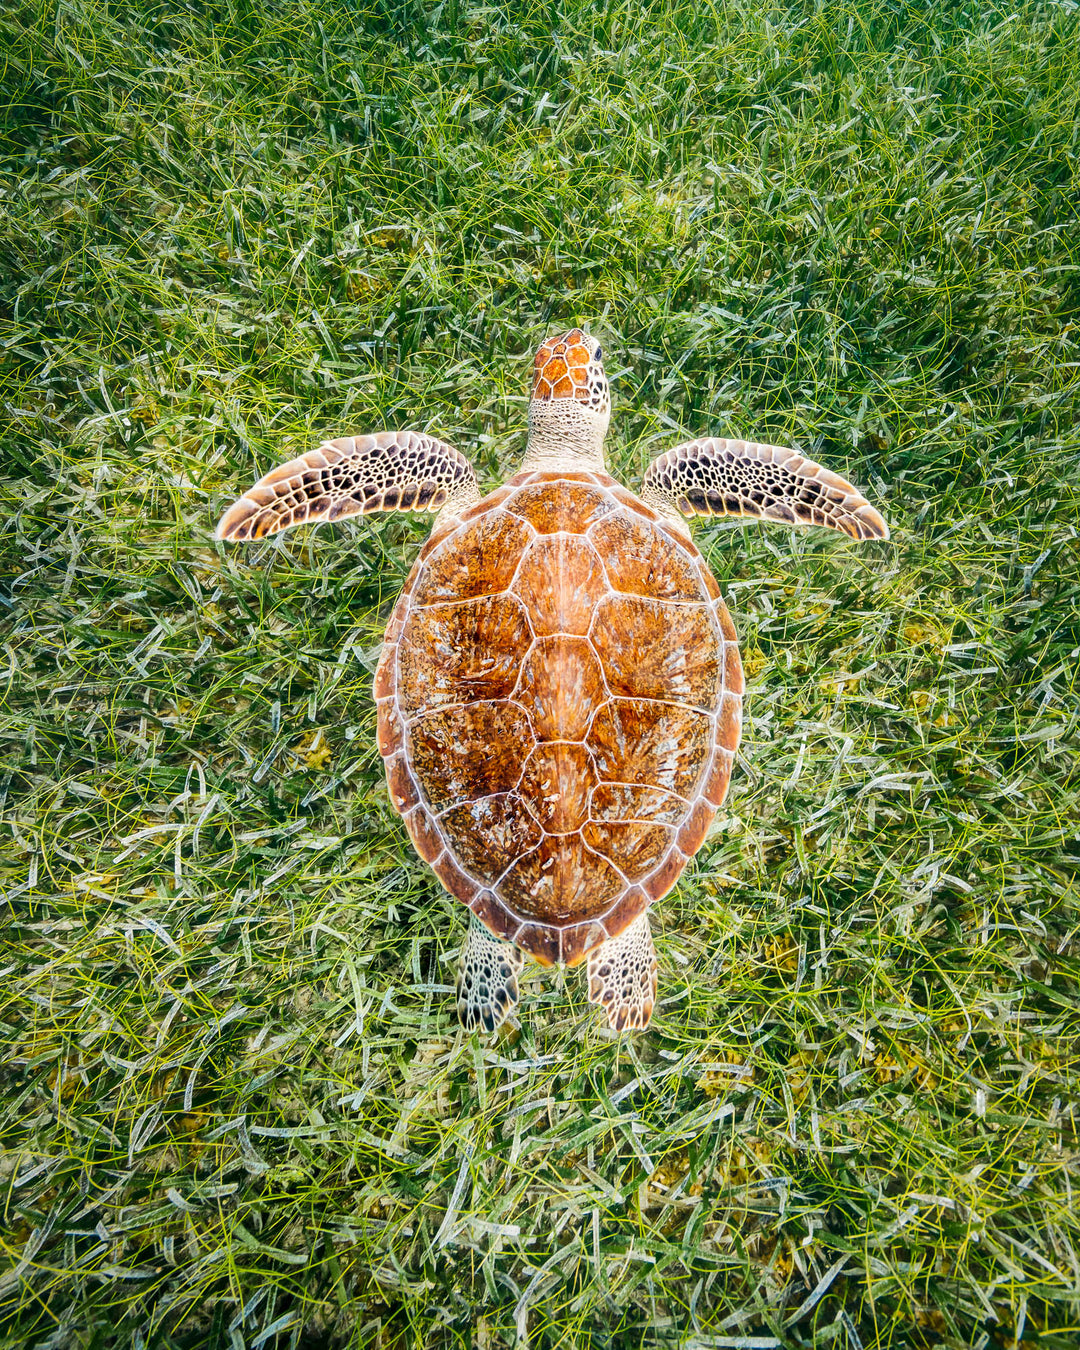 A turtle glides above a bed of sea grass in Turks and Caicos